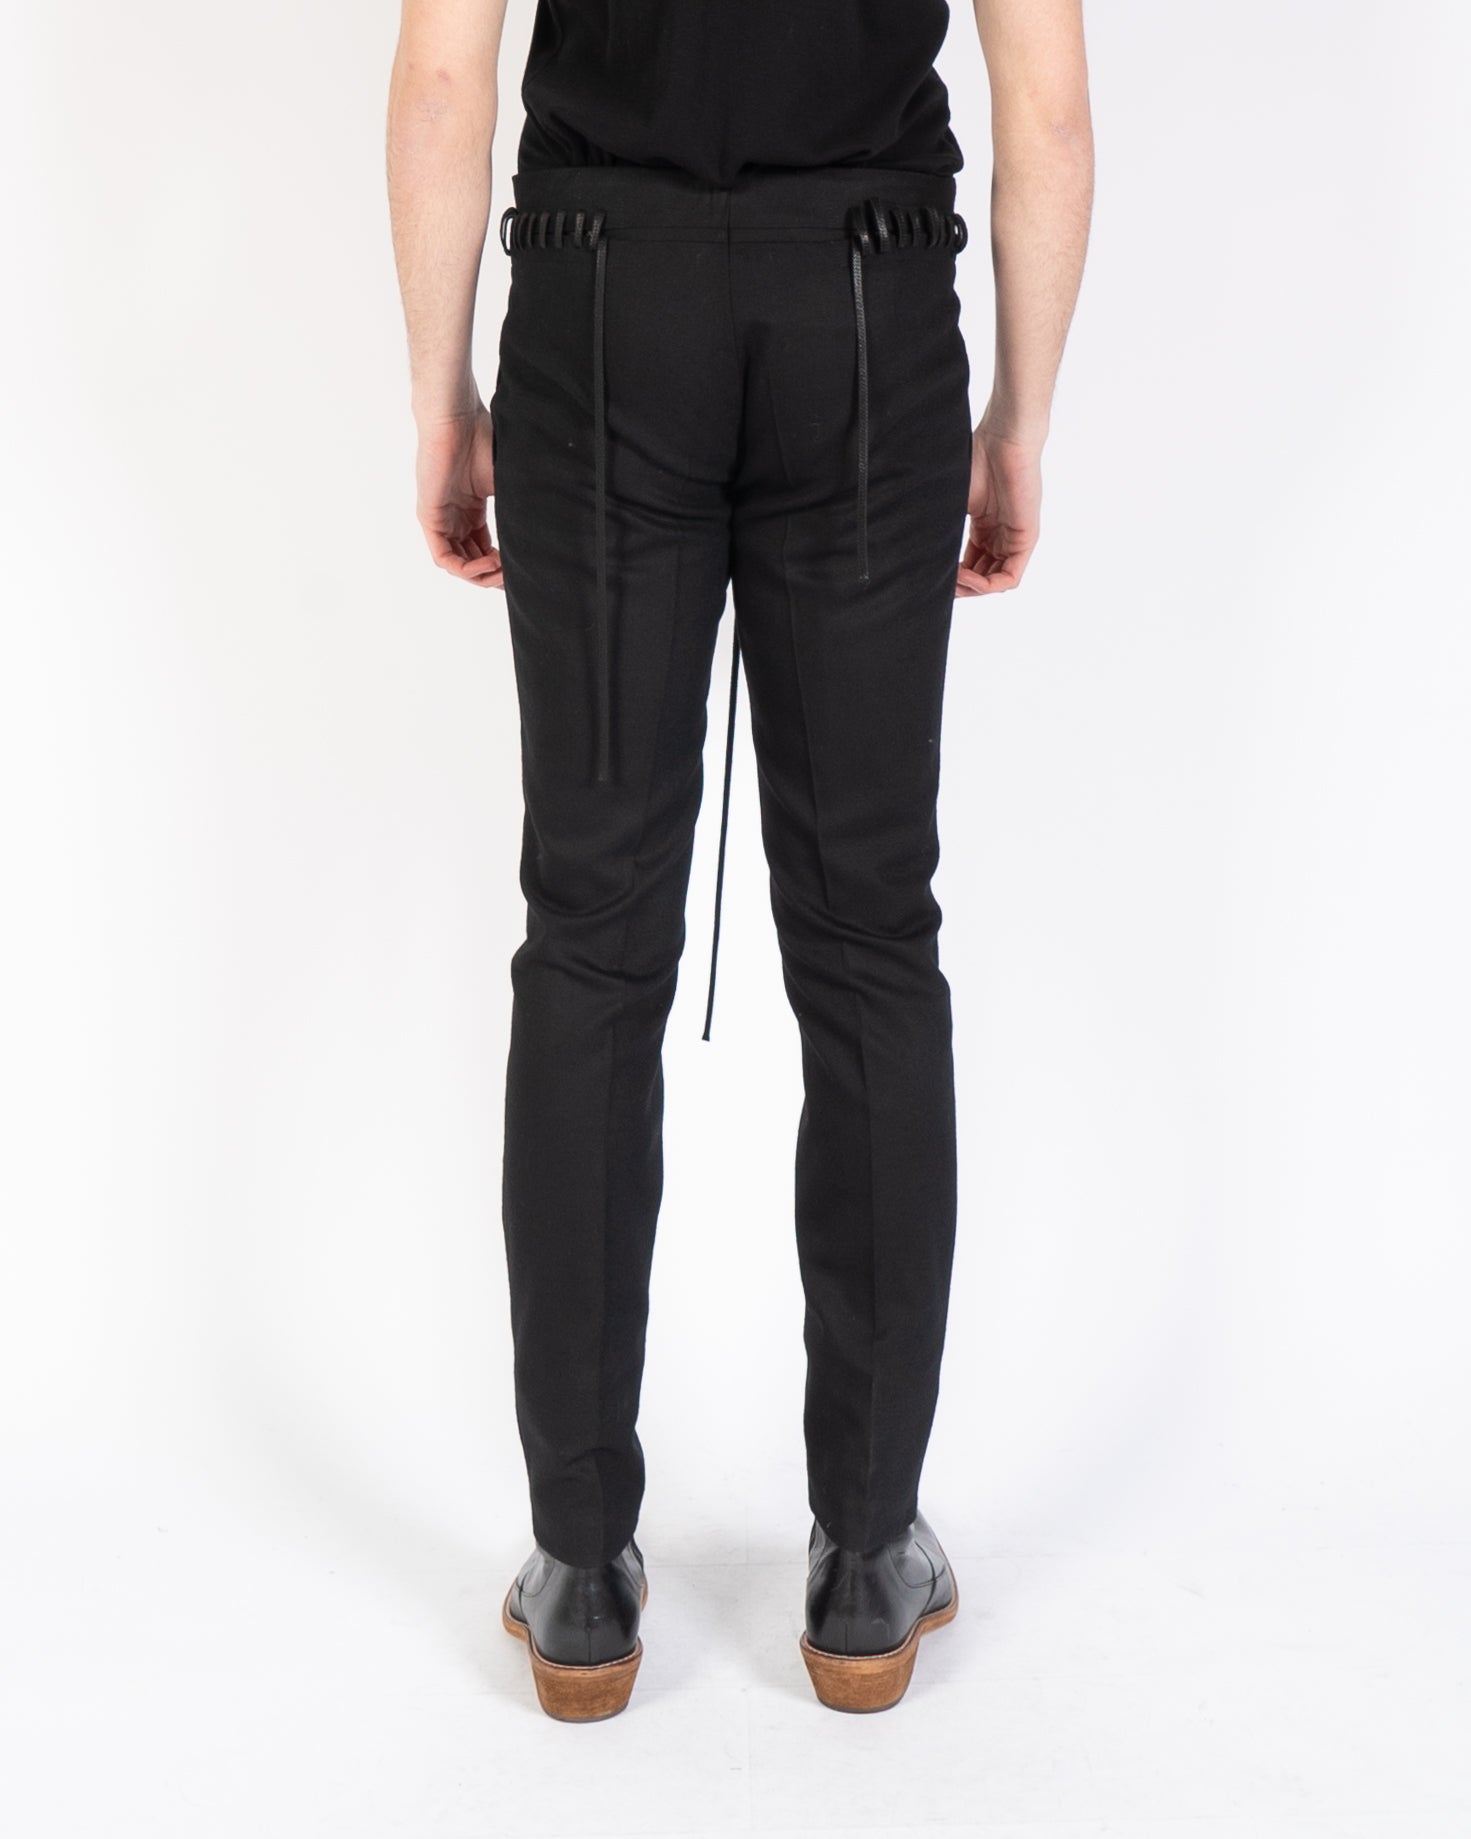 FW16 Black Laced Trousers